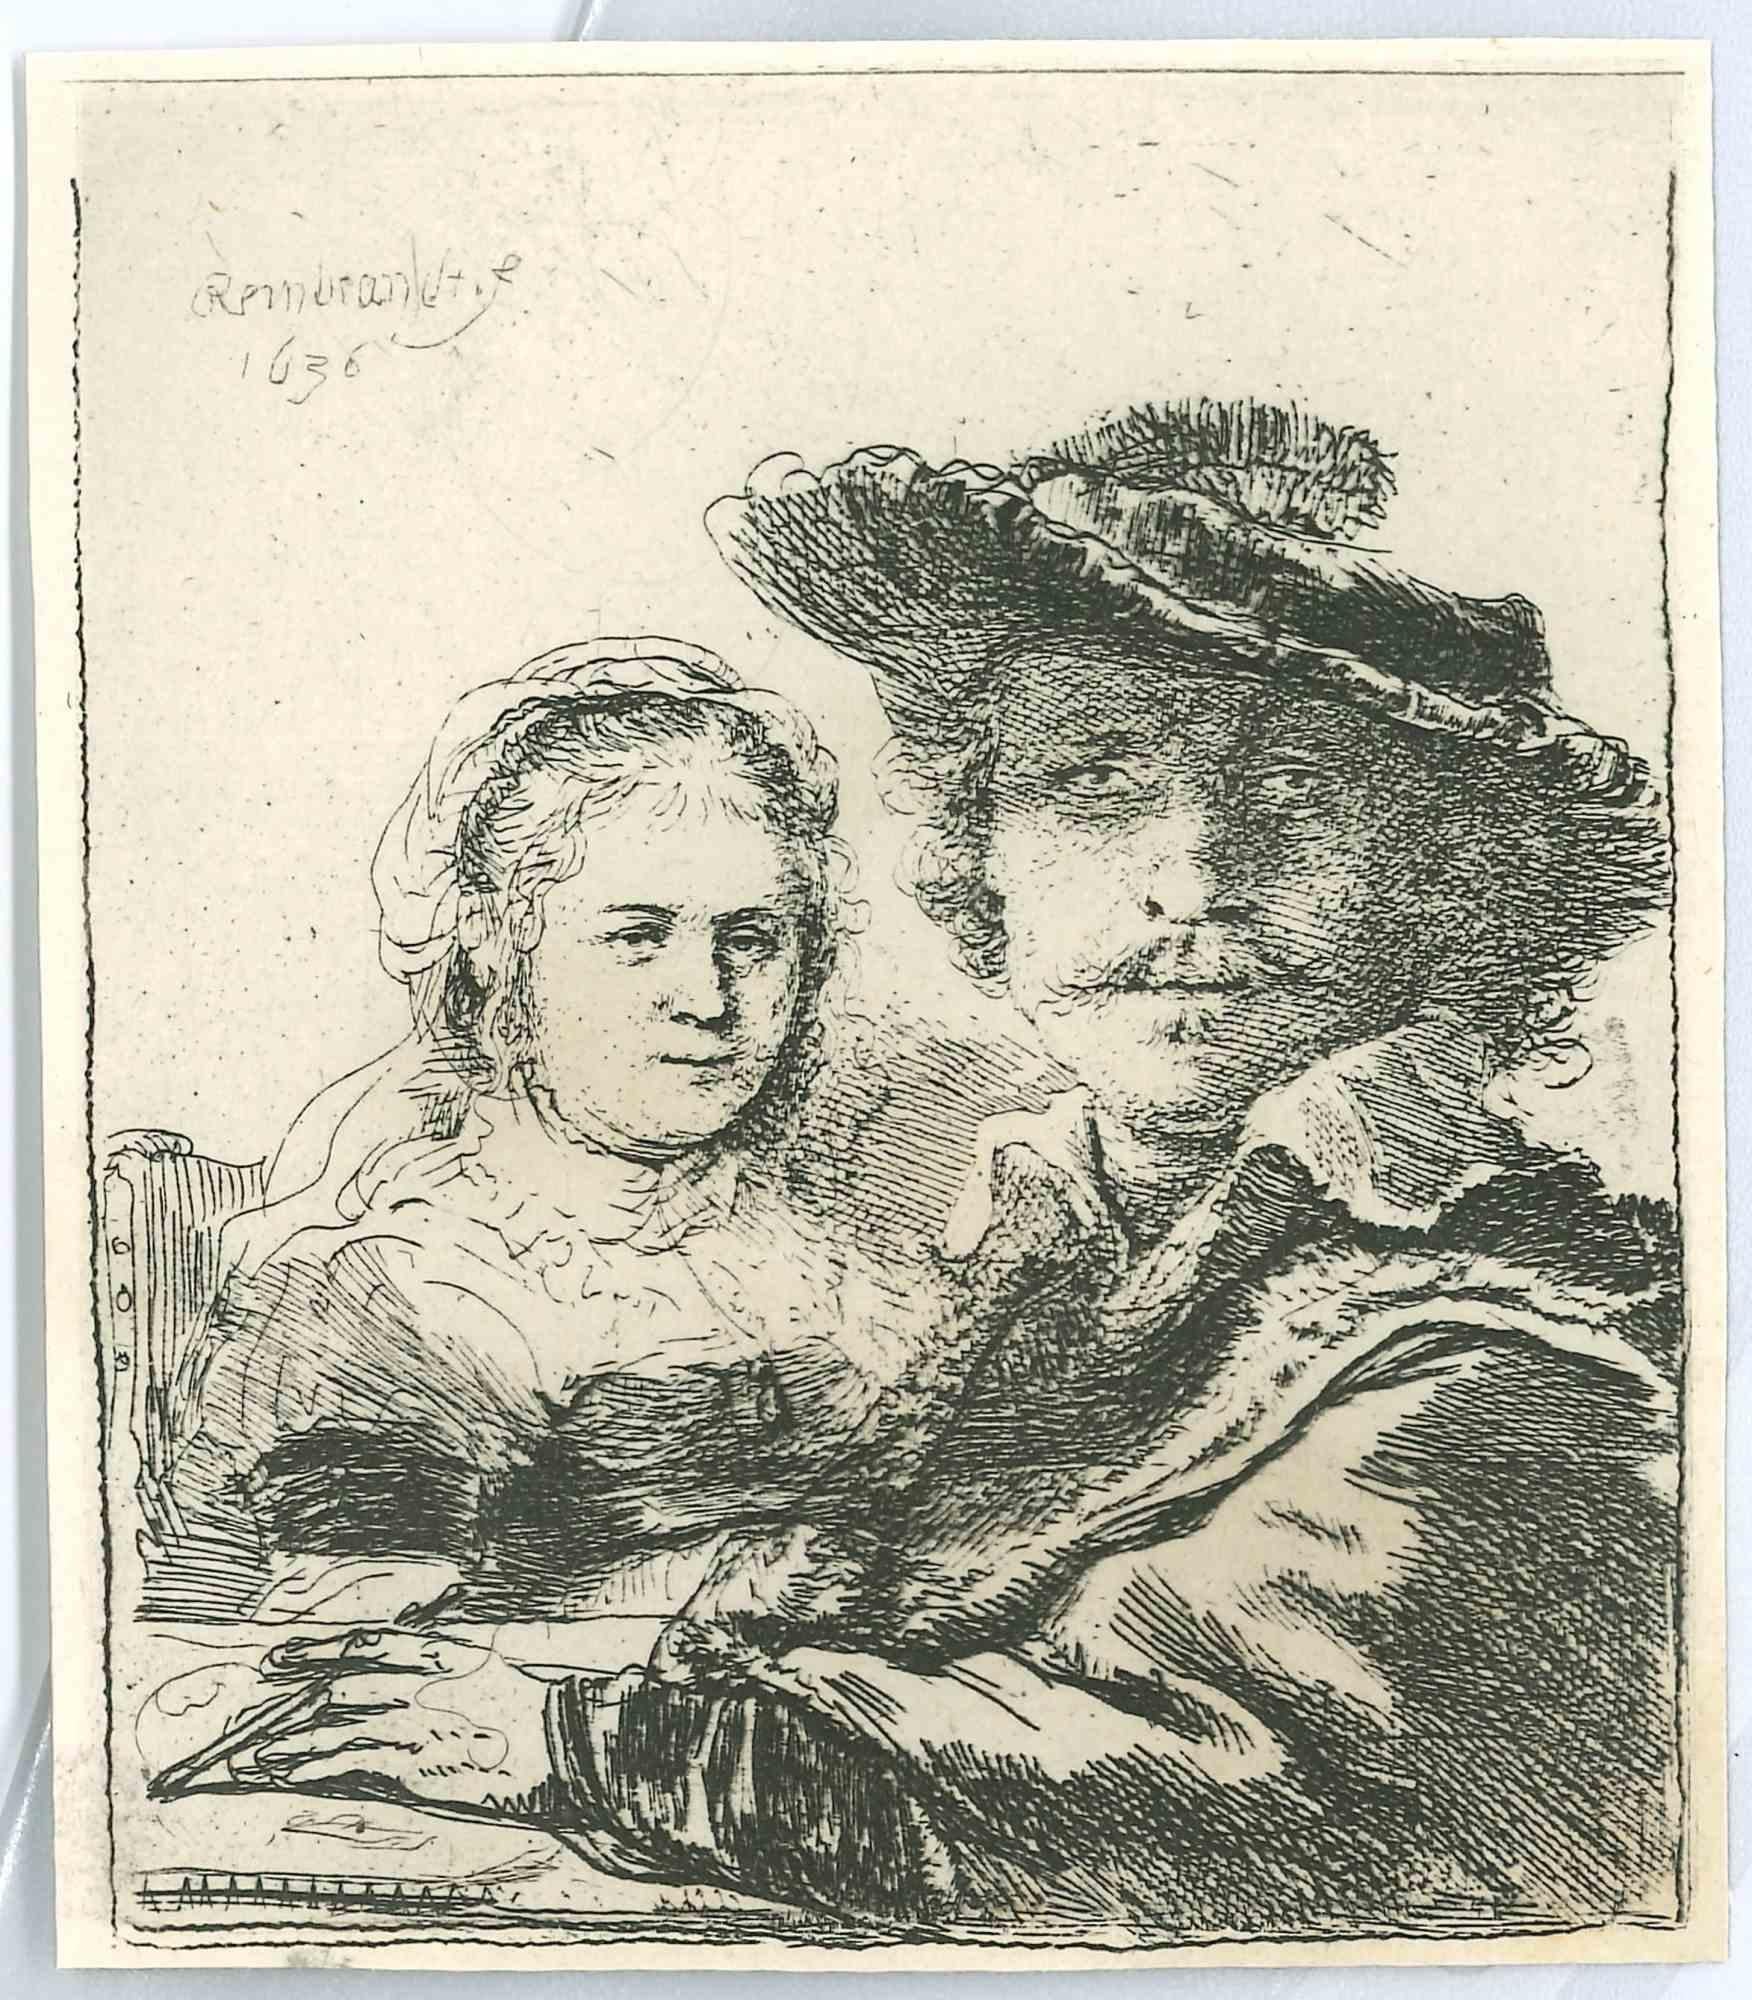 Charles Amand Durand Portrait Print - Self-Portrait with Saskia - Engraving after Rembrandt - 19th Century